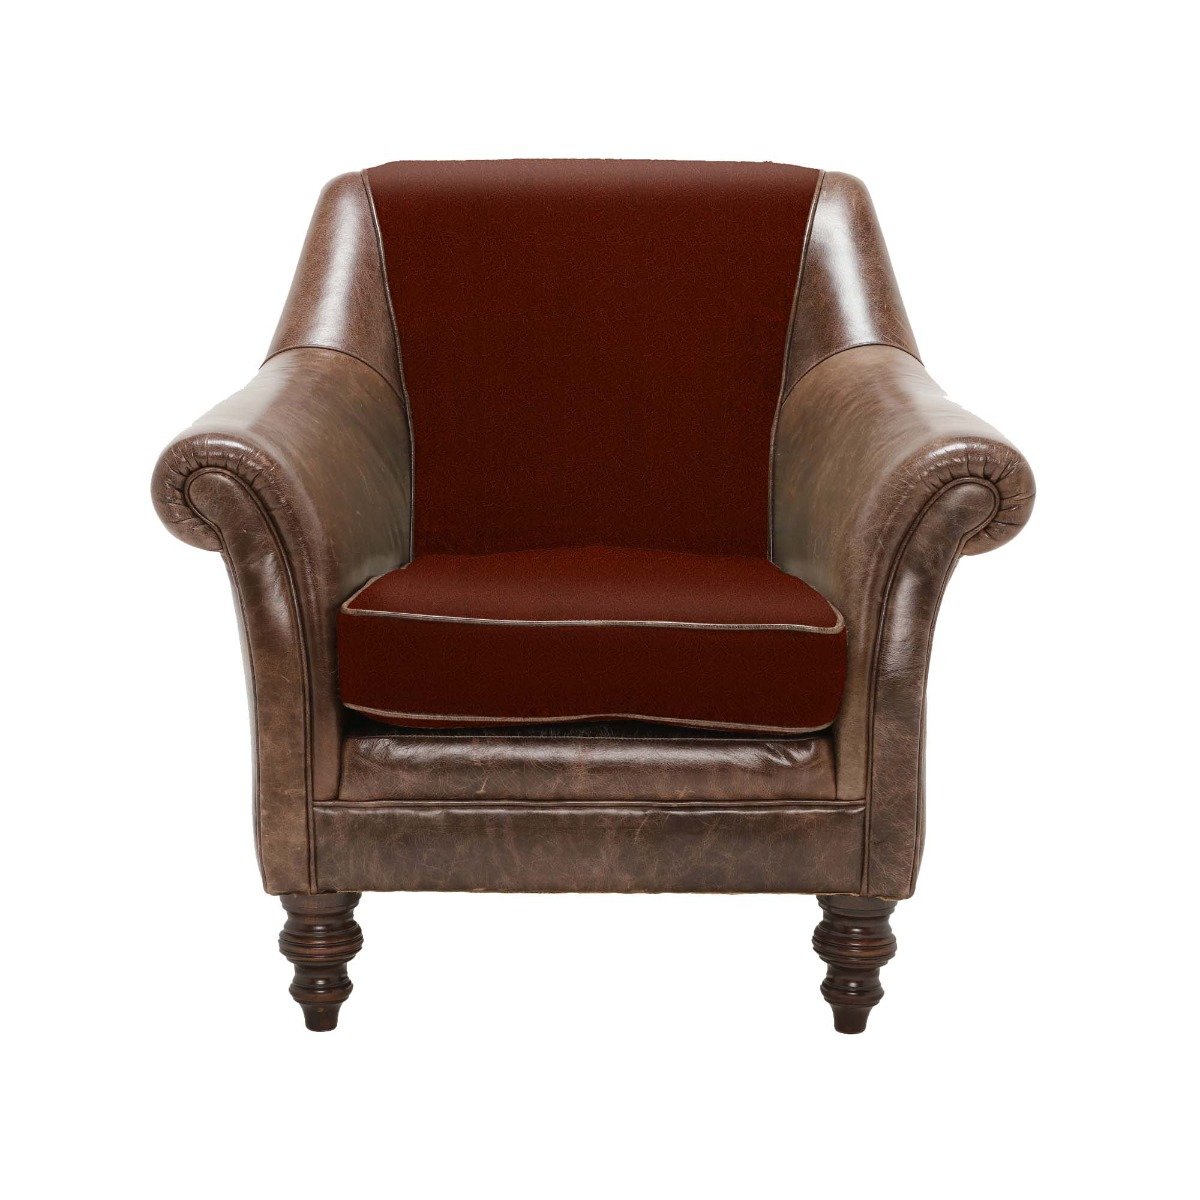 Tetrad Harris Tweed Dalmore Accent Chair, Brown Fabric | Barker & Stonehouse